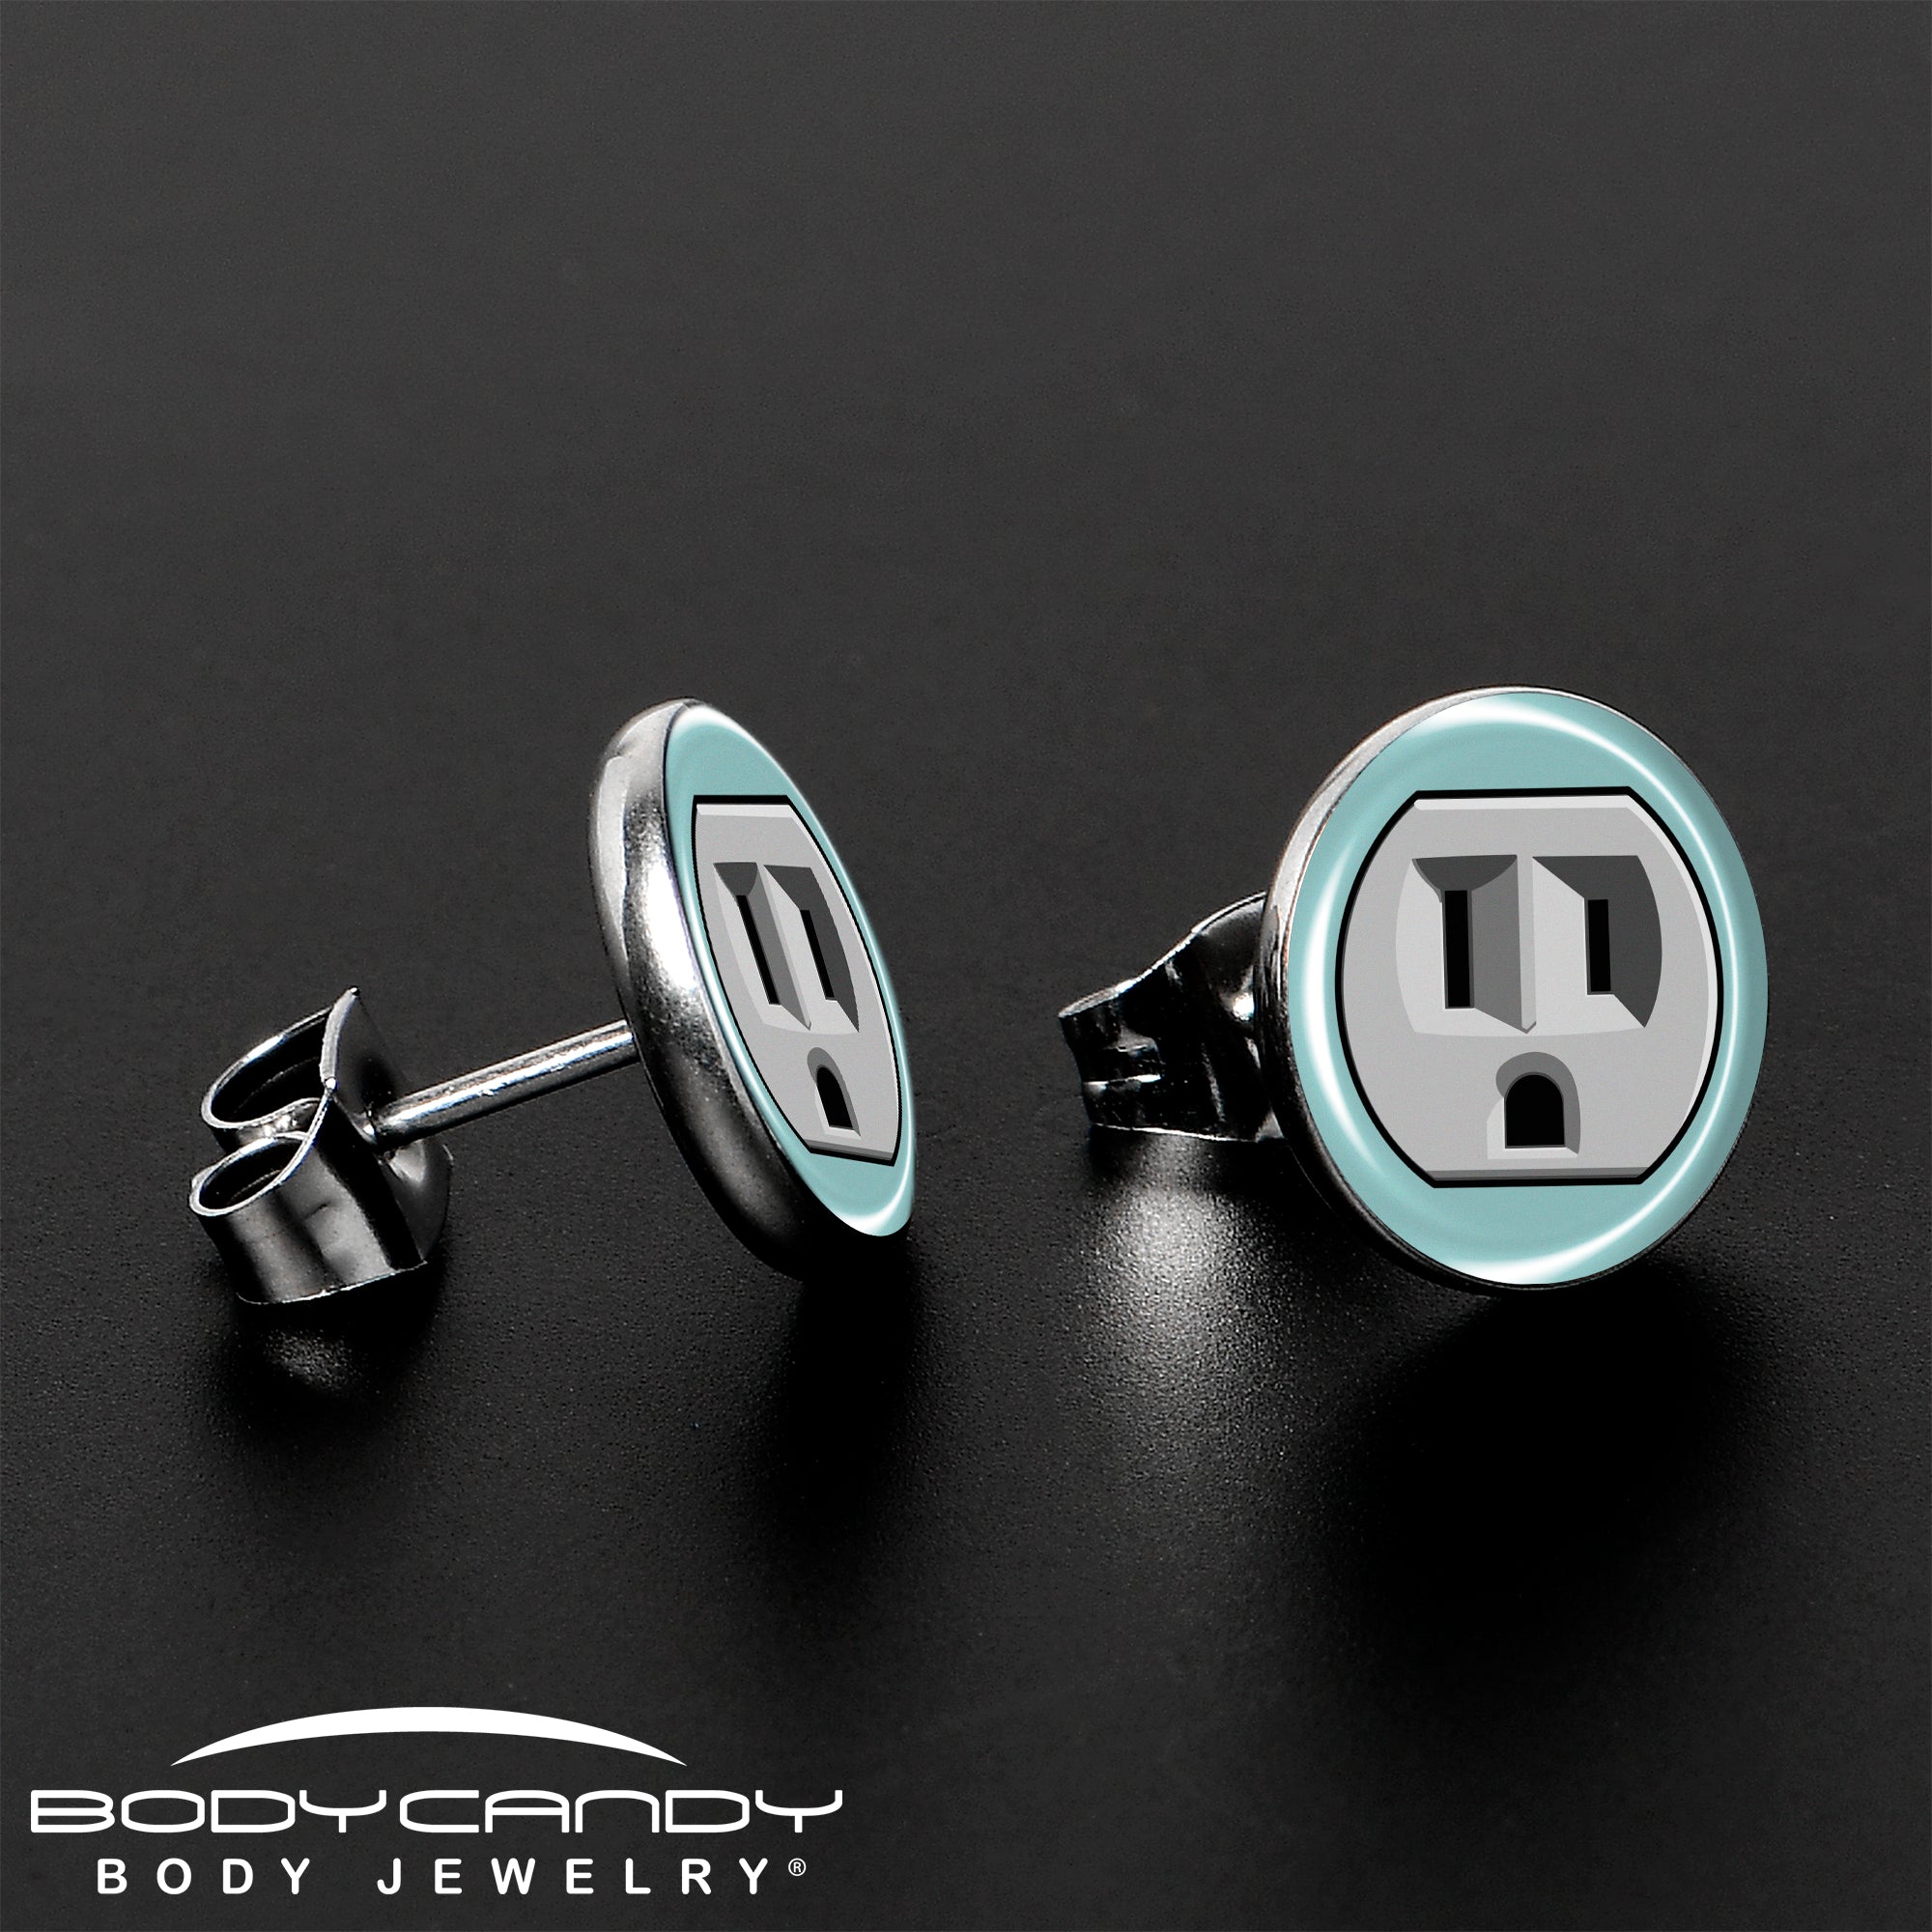 Frowning Plug Outlet Stud Earrings